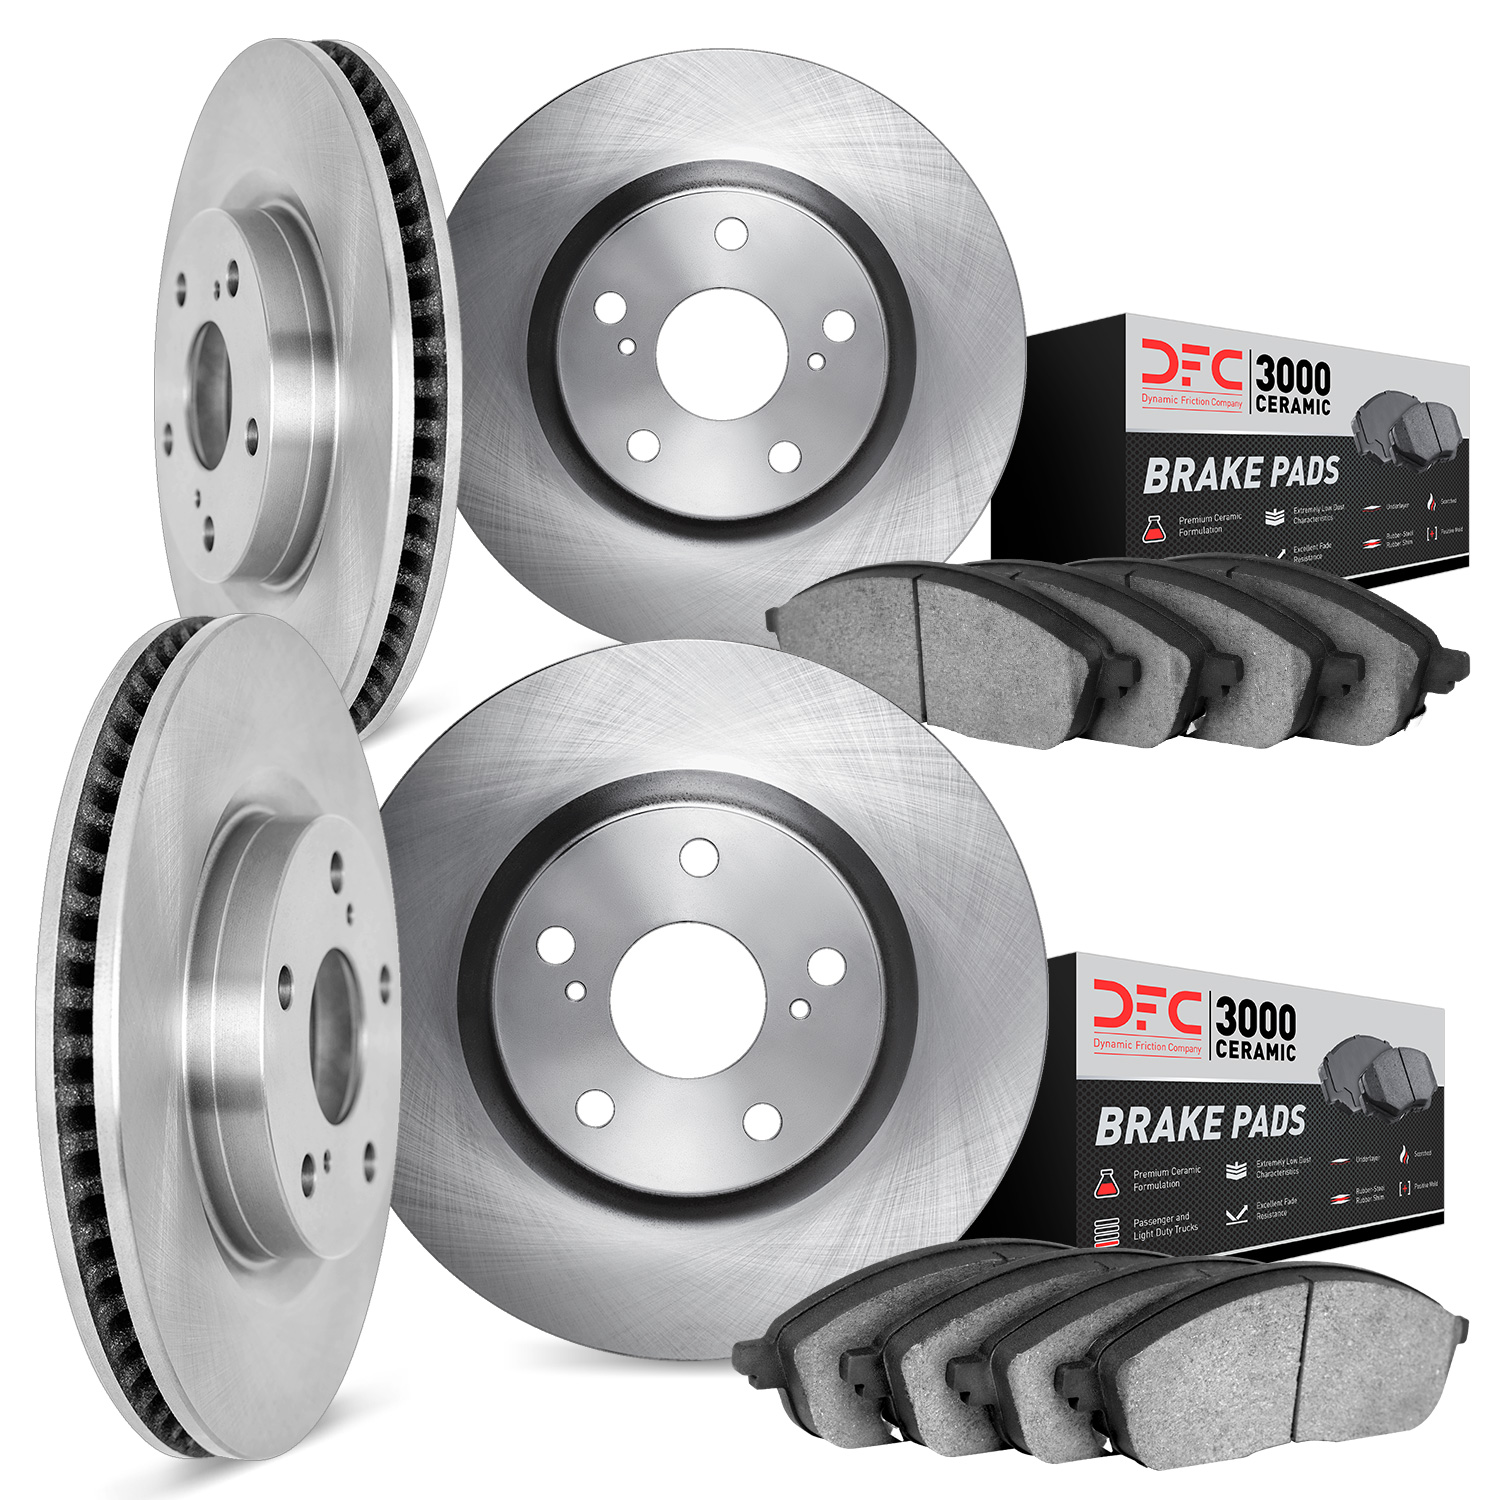 6304-31035 Brake Rotors with 3000-Series Ceramic Brake Pads Kit, 2003-2008 BMW, Position: Front and Rear